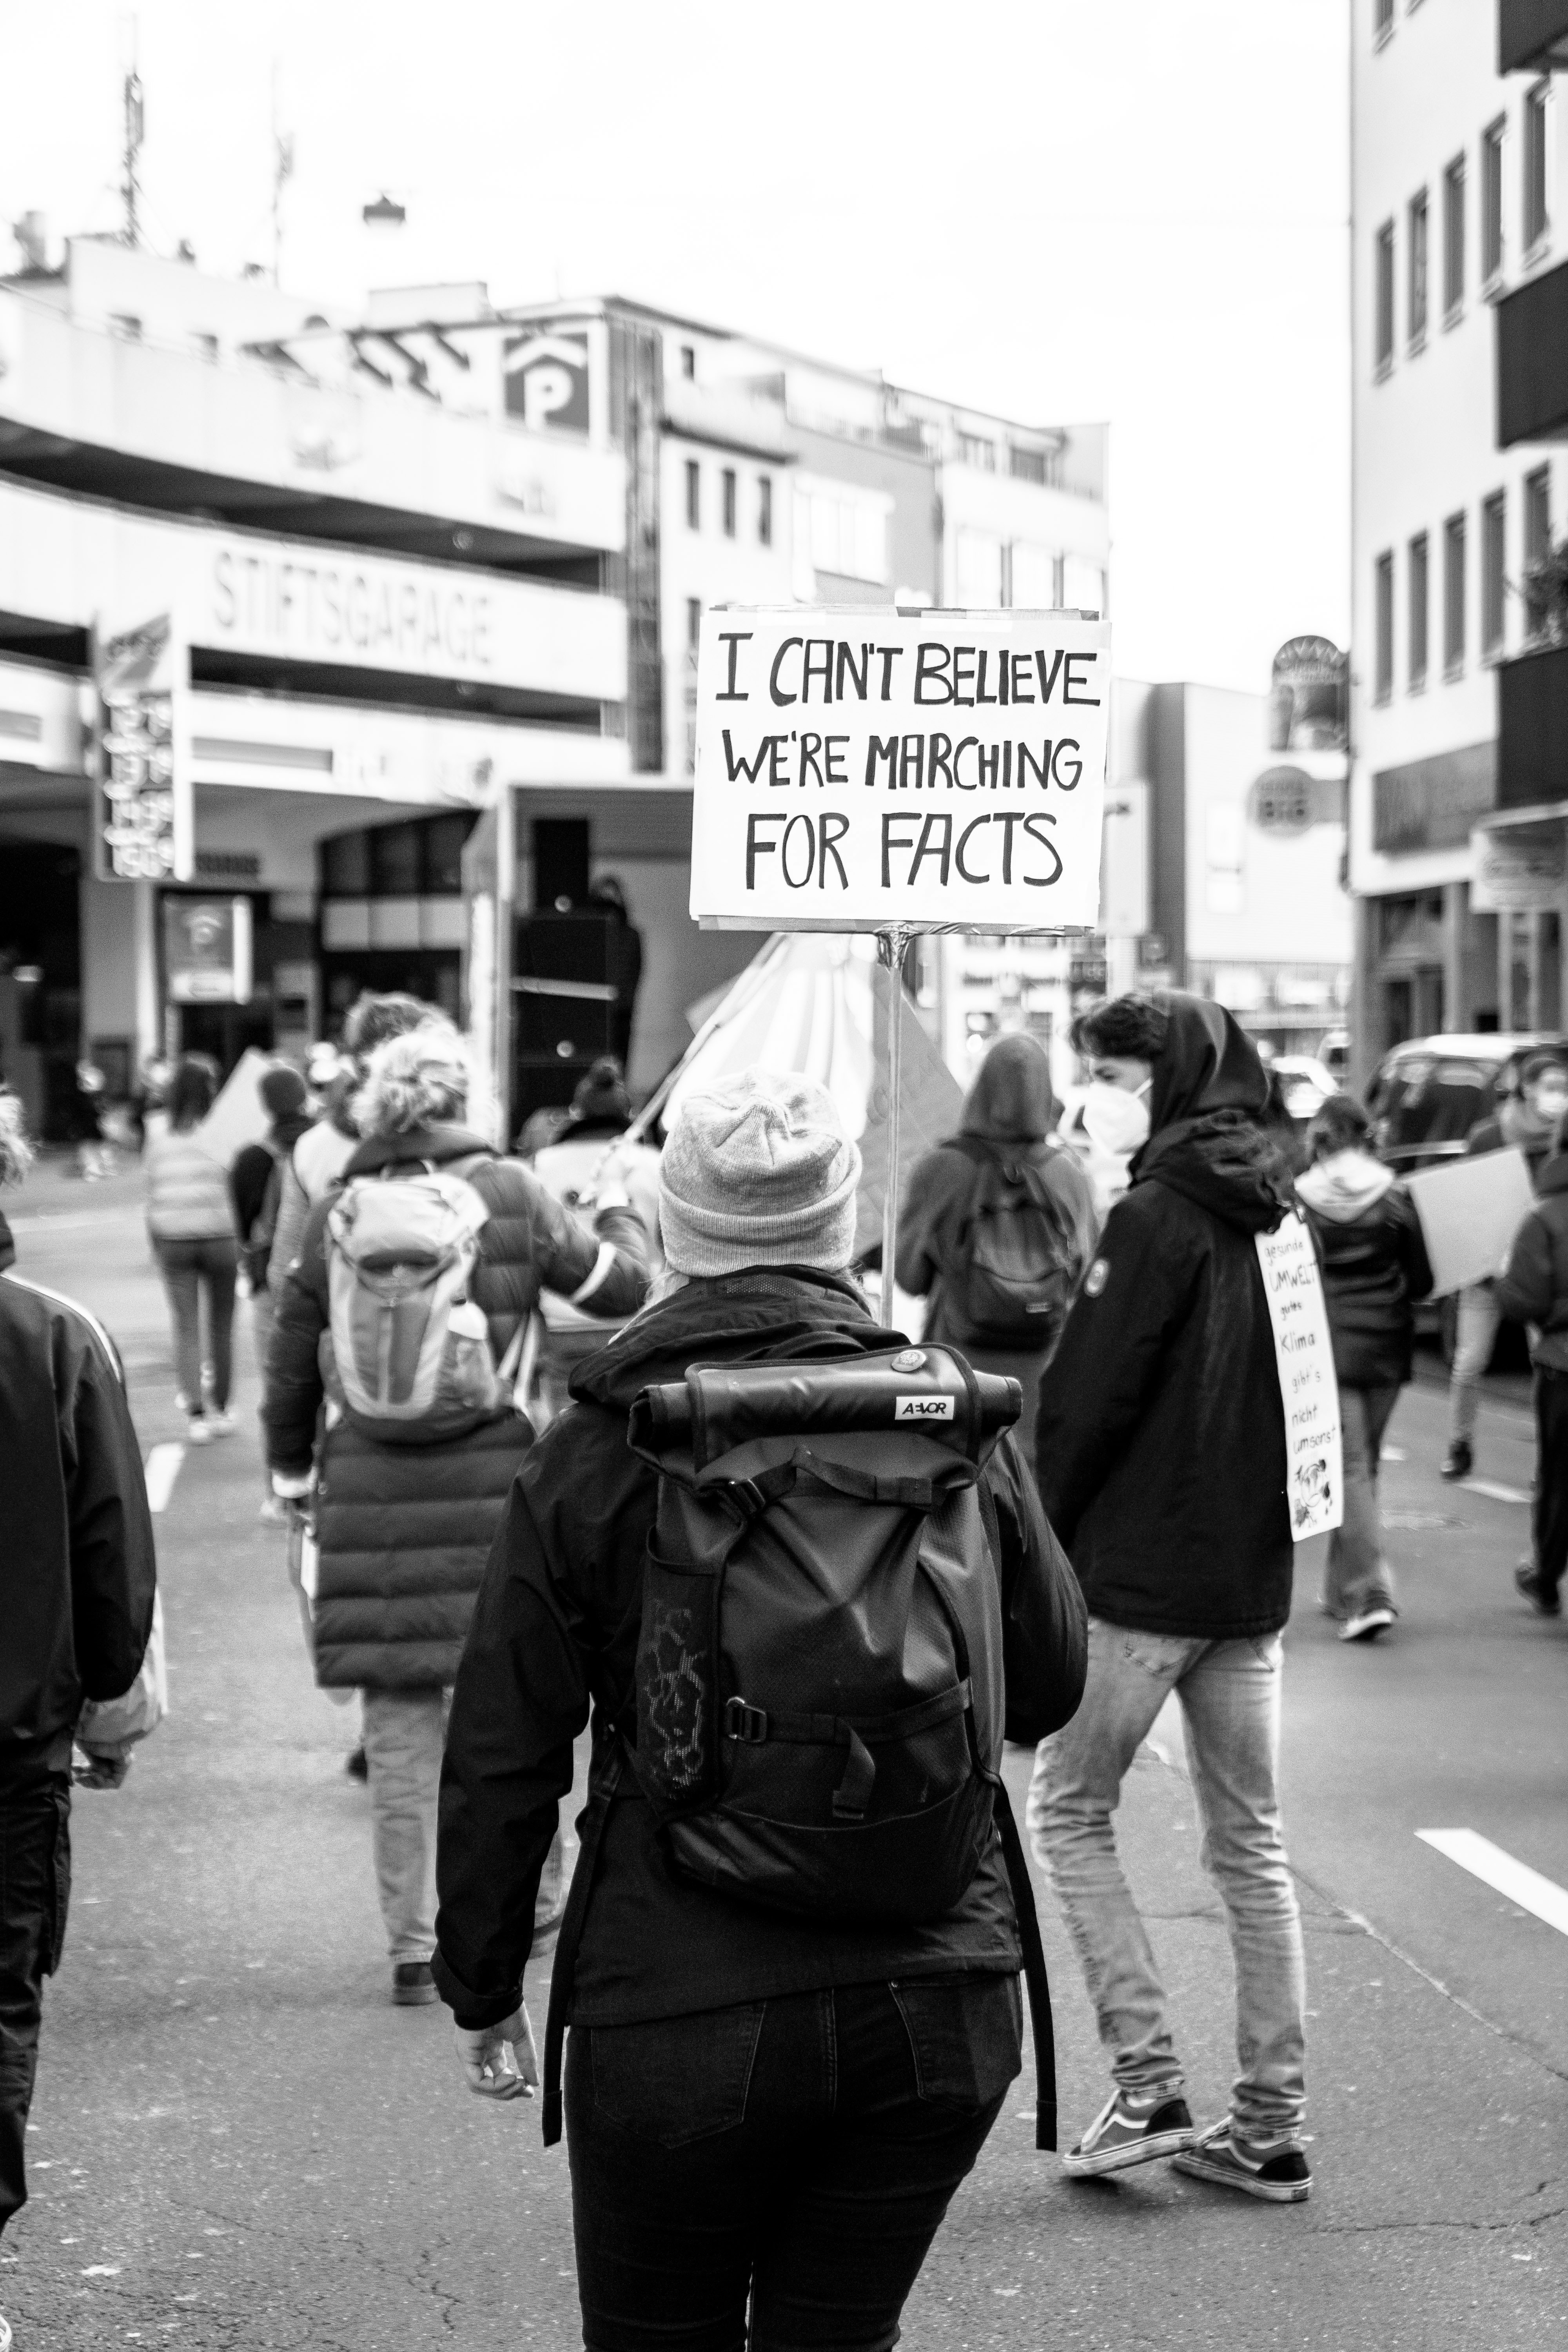 Black-and-white photo of protesters marching away from the camera, with a sign reading "I CAN'T BELIEVE WE'RE MARCHING FOR FACTS"